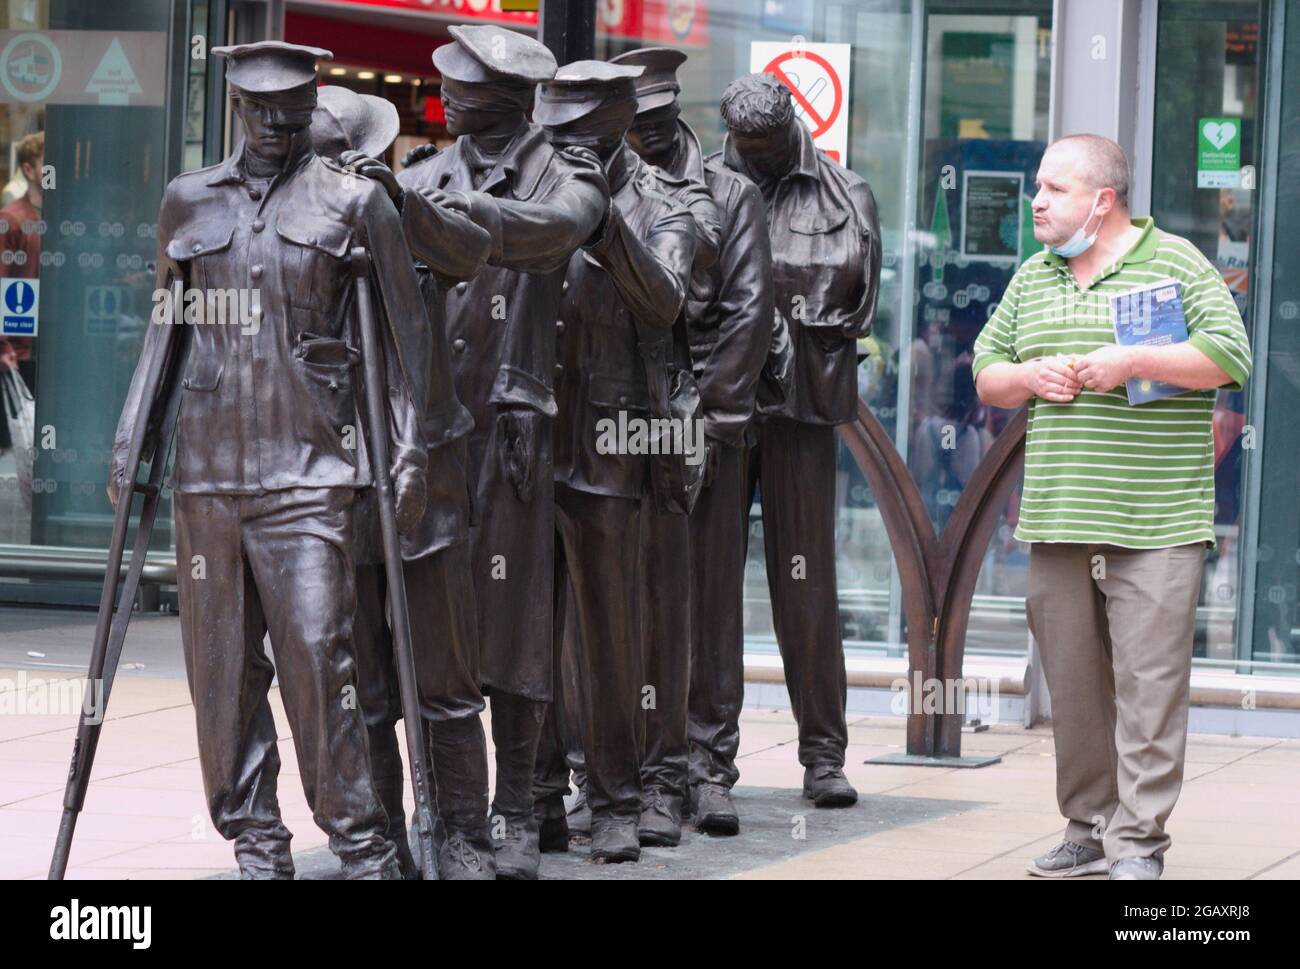 A man looks at  a statue of seven blinded soldiers outside the main entrance of Manchester Piccadilly Railway Station, central Manchester, England, United Kingdom,  Marking the centenary of the end of the First World War, it is entitled, 'Victory Over Blindness'. It was commissioned by the military charity Blind Veterans UK. The original sculpture was conceived and designed by artist and sculptor Johanna Domke-Guyot. Stock Photo